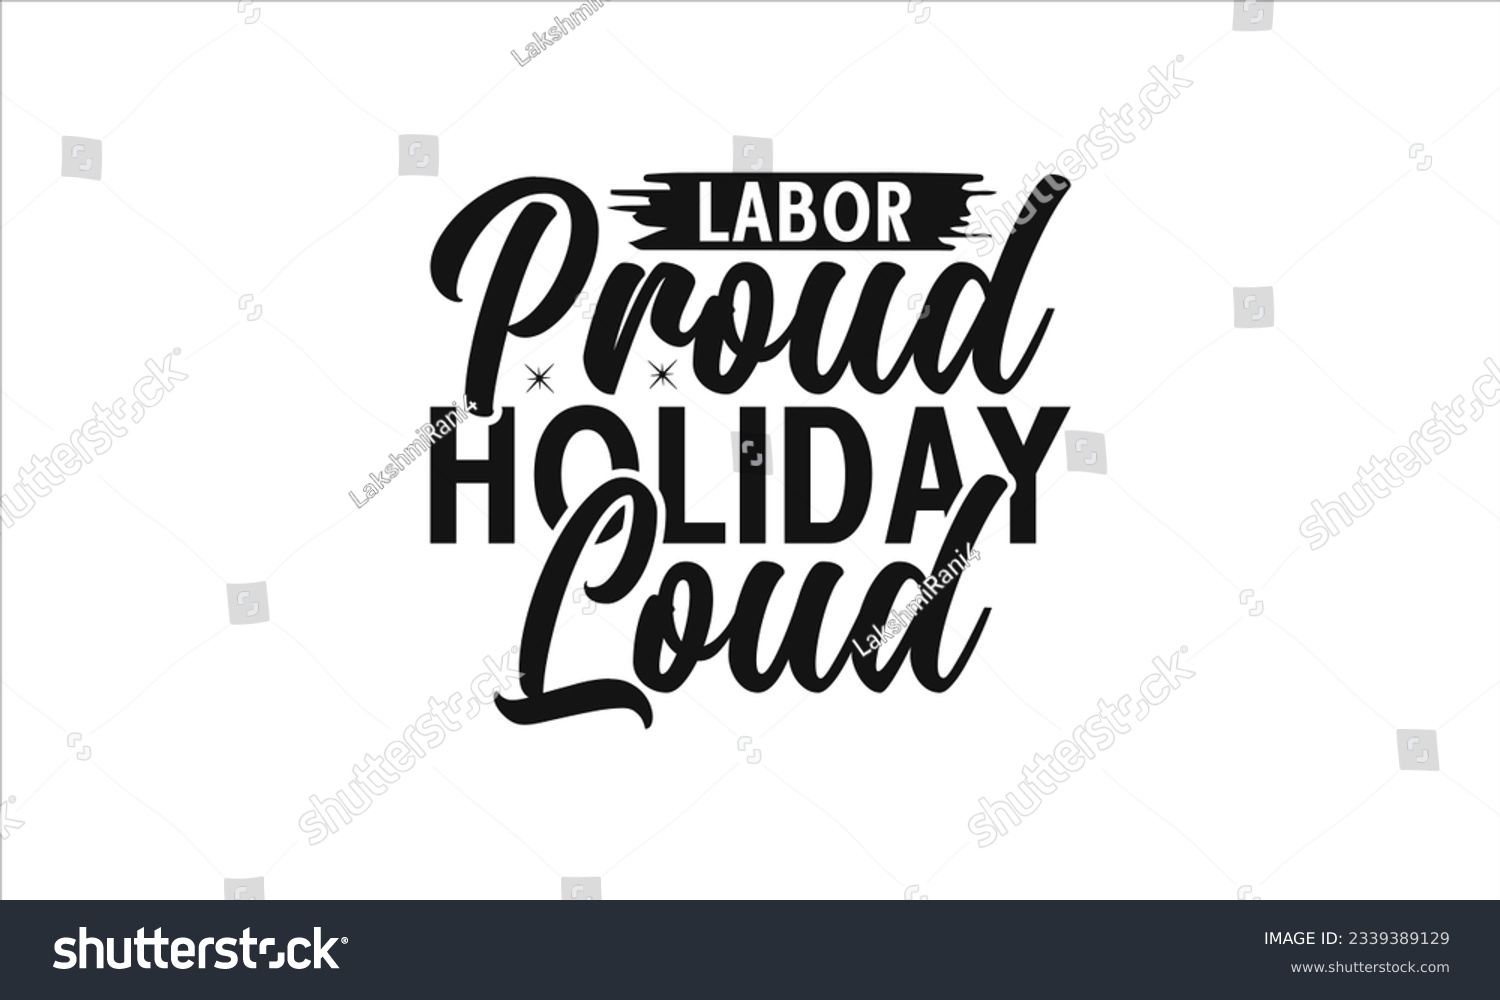 SVG of  Labor Proud Holiday Loud -  Lettering design for greeting banners, Mouse Pads, Prints, Cards and Posters, Mugs, Notebooks, Floor Pillows and T-shirt prints design.
 svg